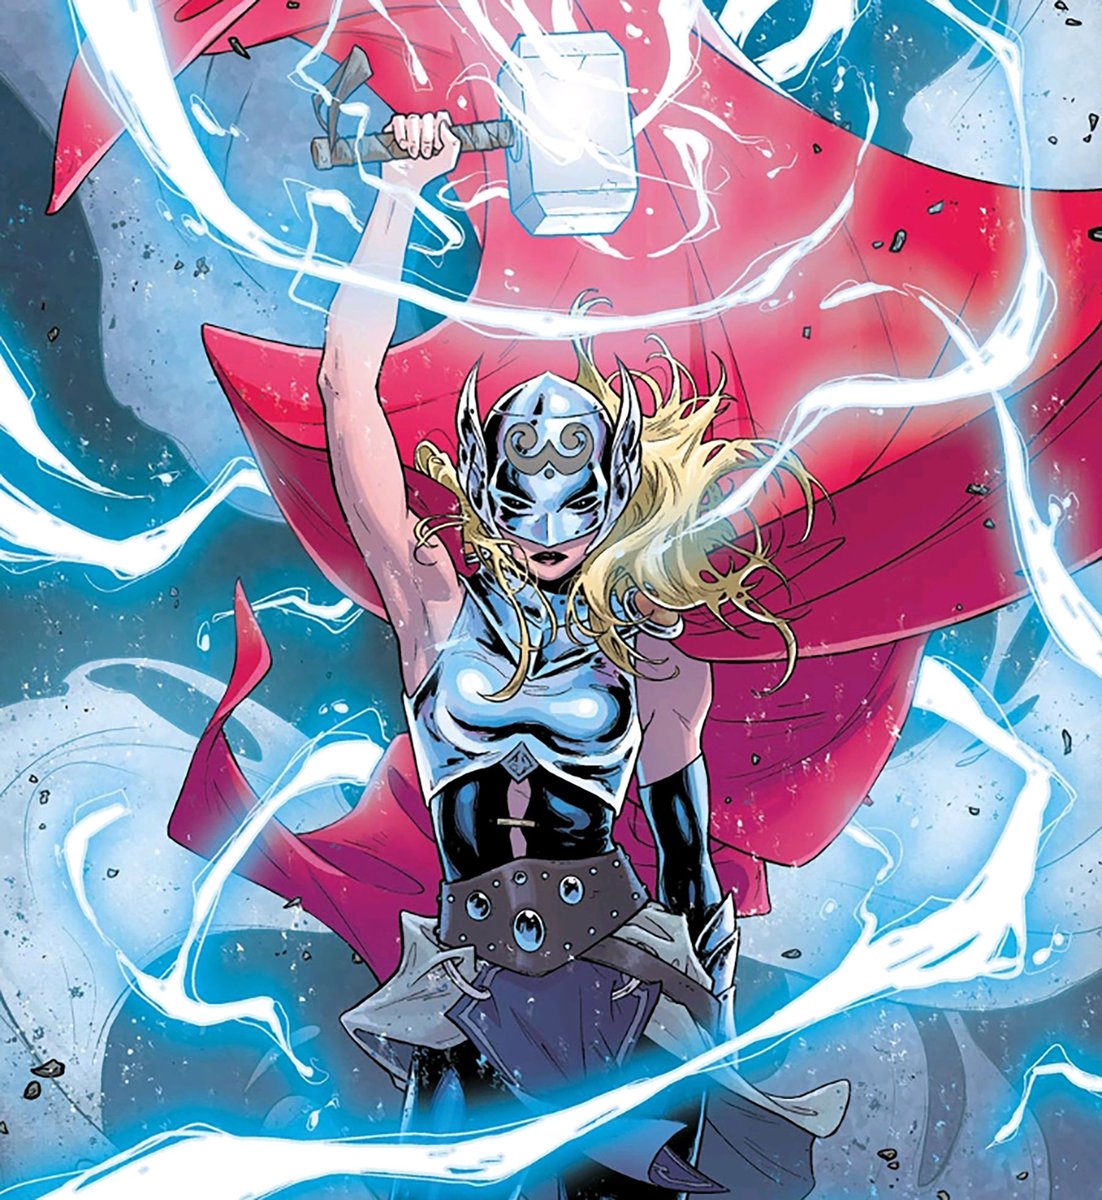 RT @SecretThw1p: So anyways Jane Foster is the superior Thor BYEEEEE https://t.co/ZoFsiMcR38